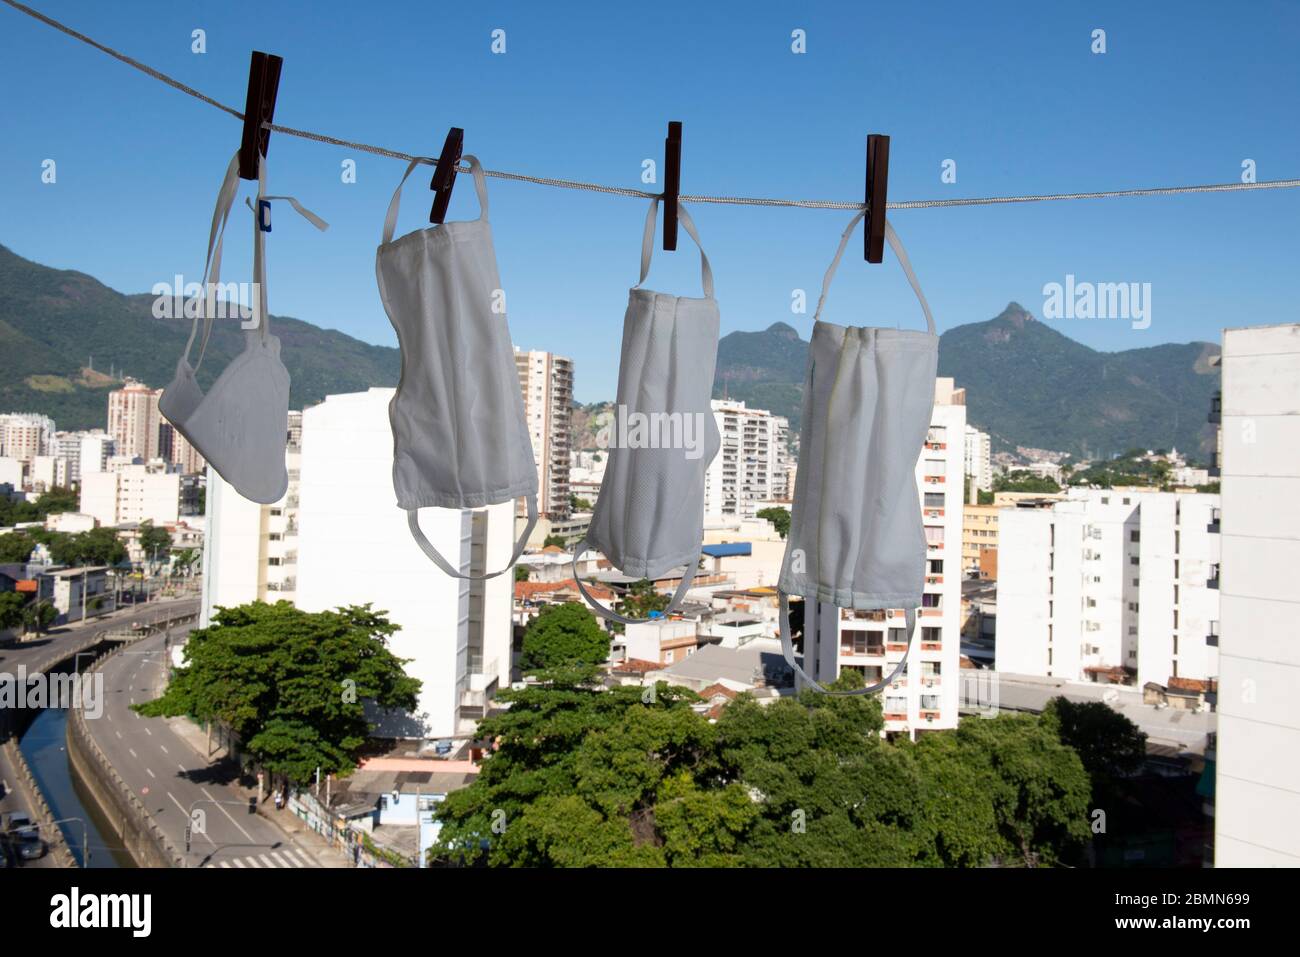 masks drying after washing to sterilize covid-9 in a apartment balcony Stock Photo